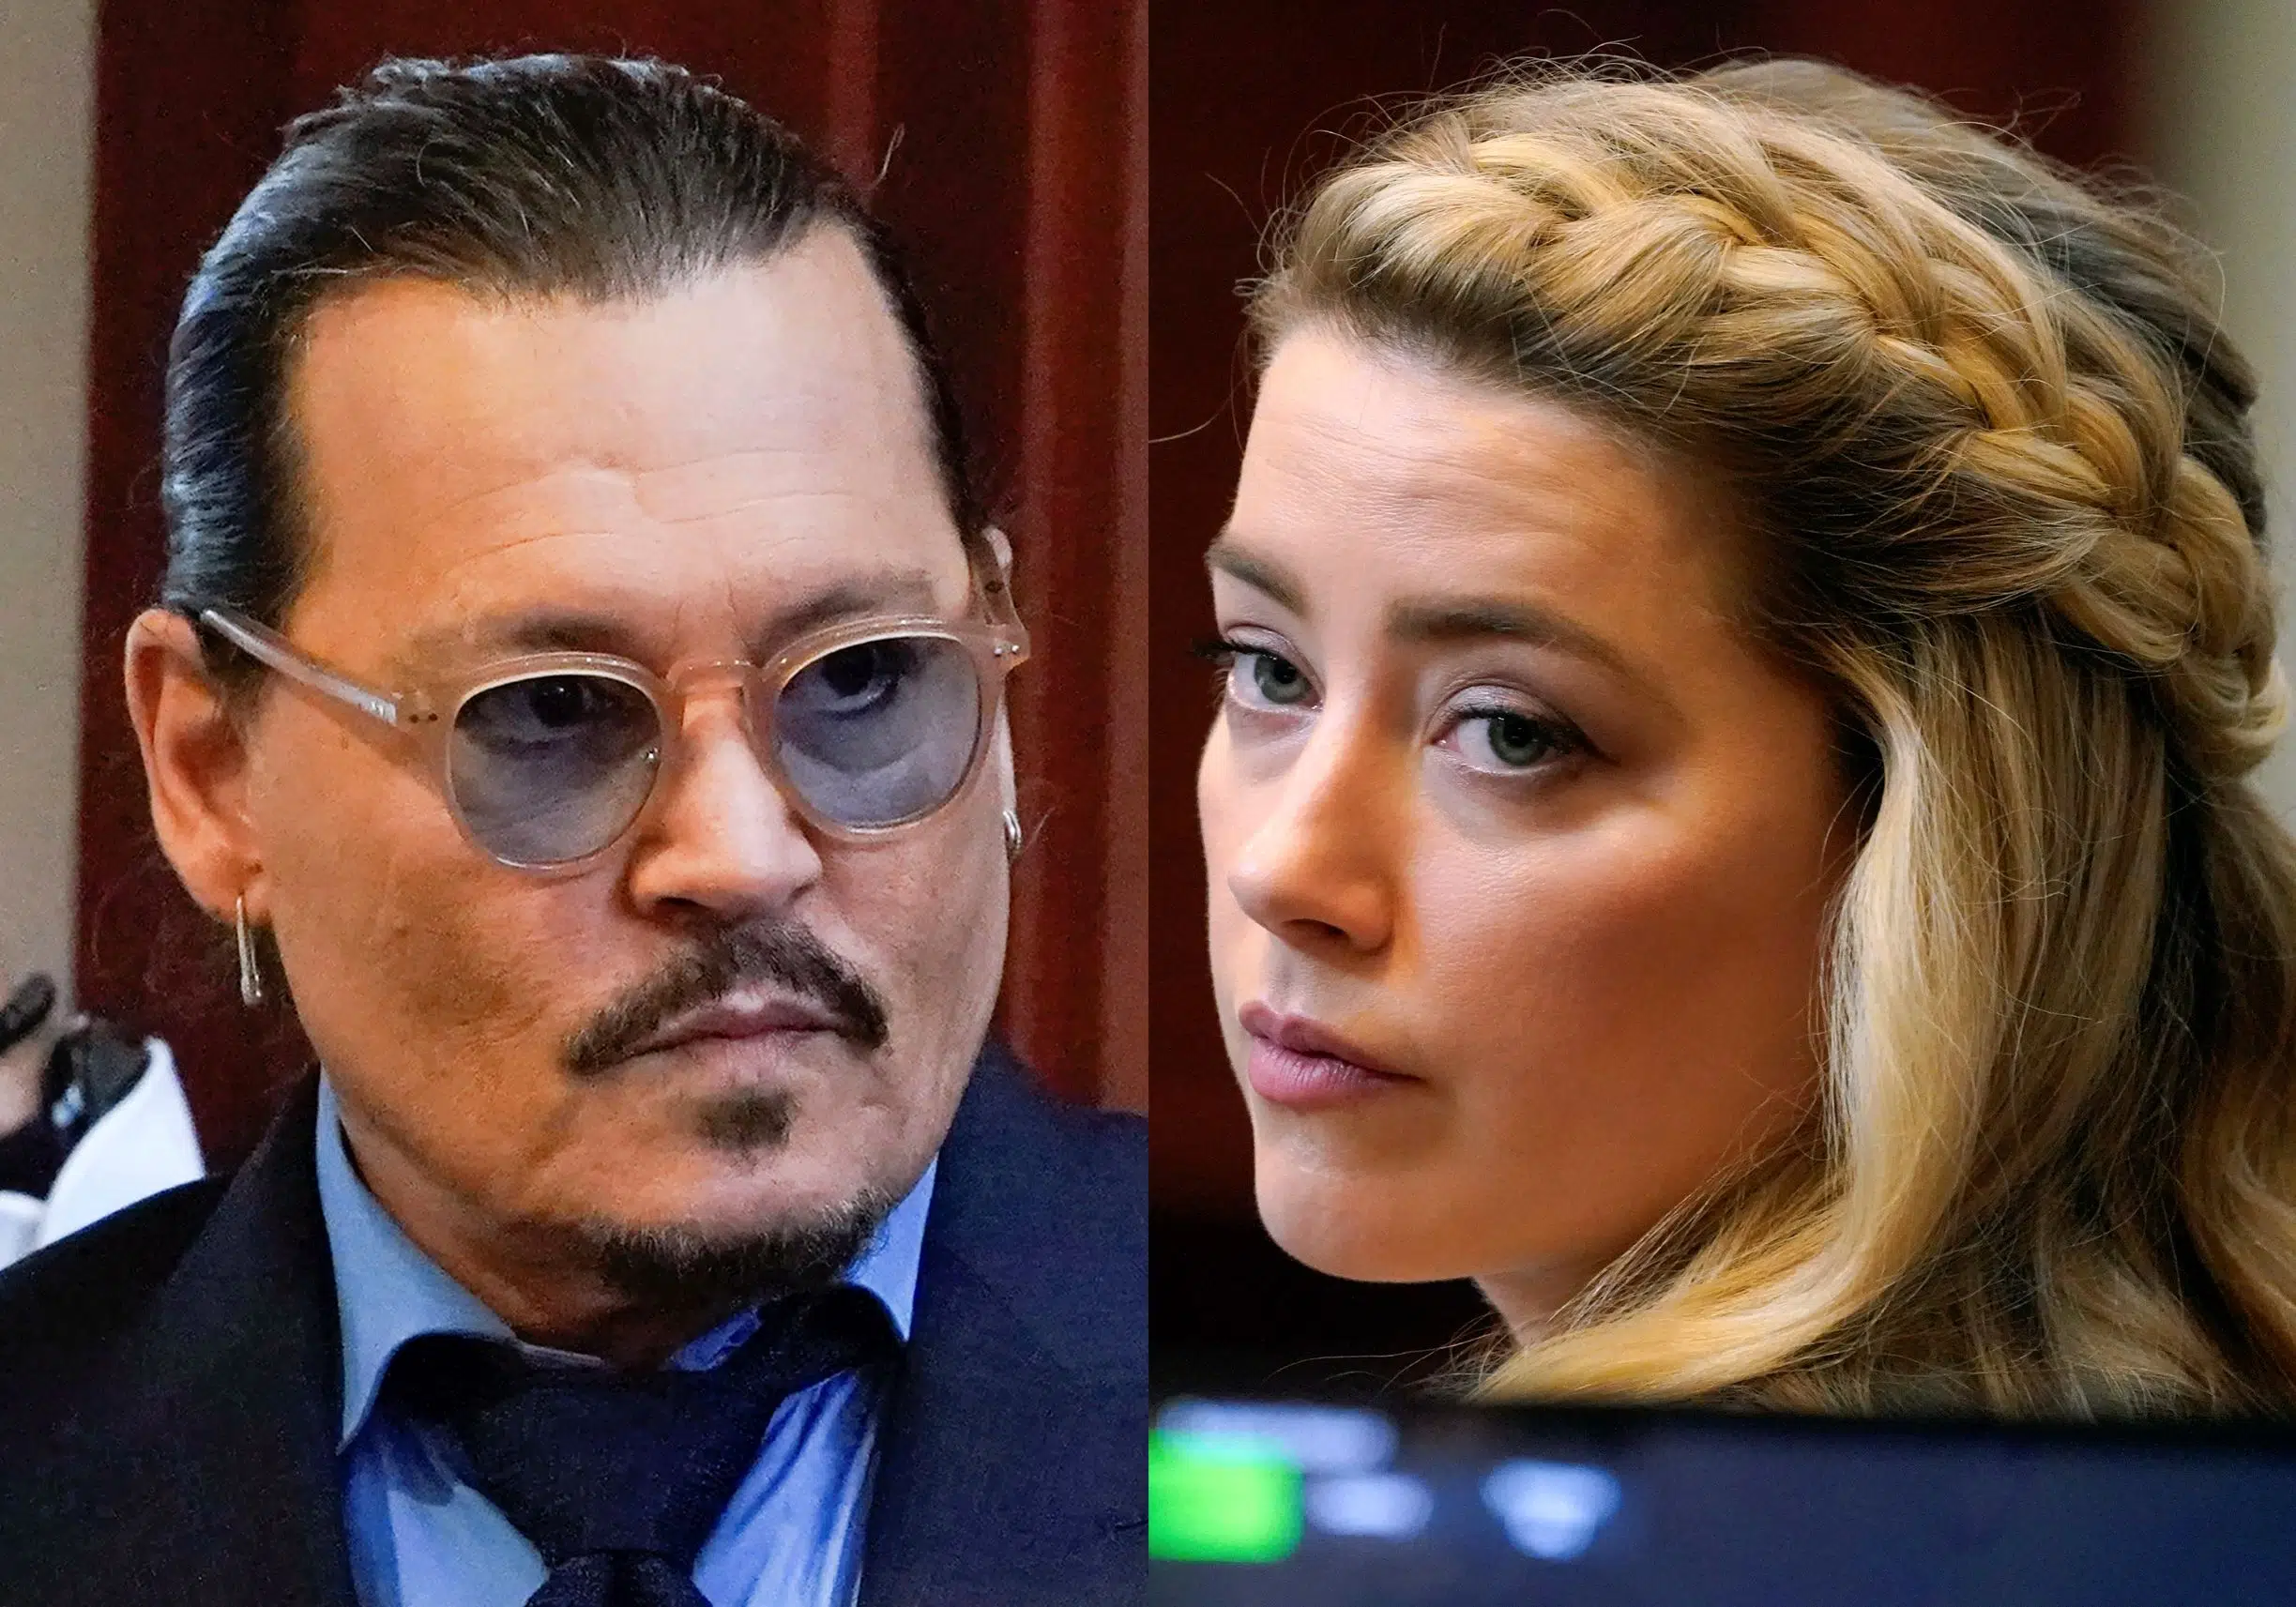 Johnny Depp Is Biggest Winner in Lawsuits Between the Actor and His Ex-Wife